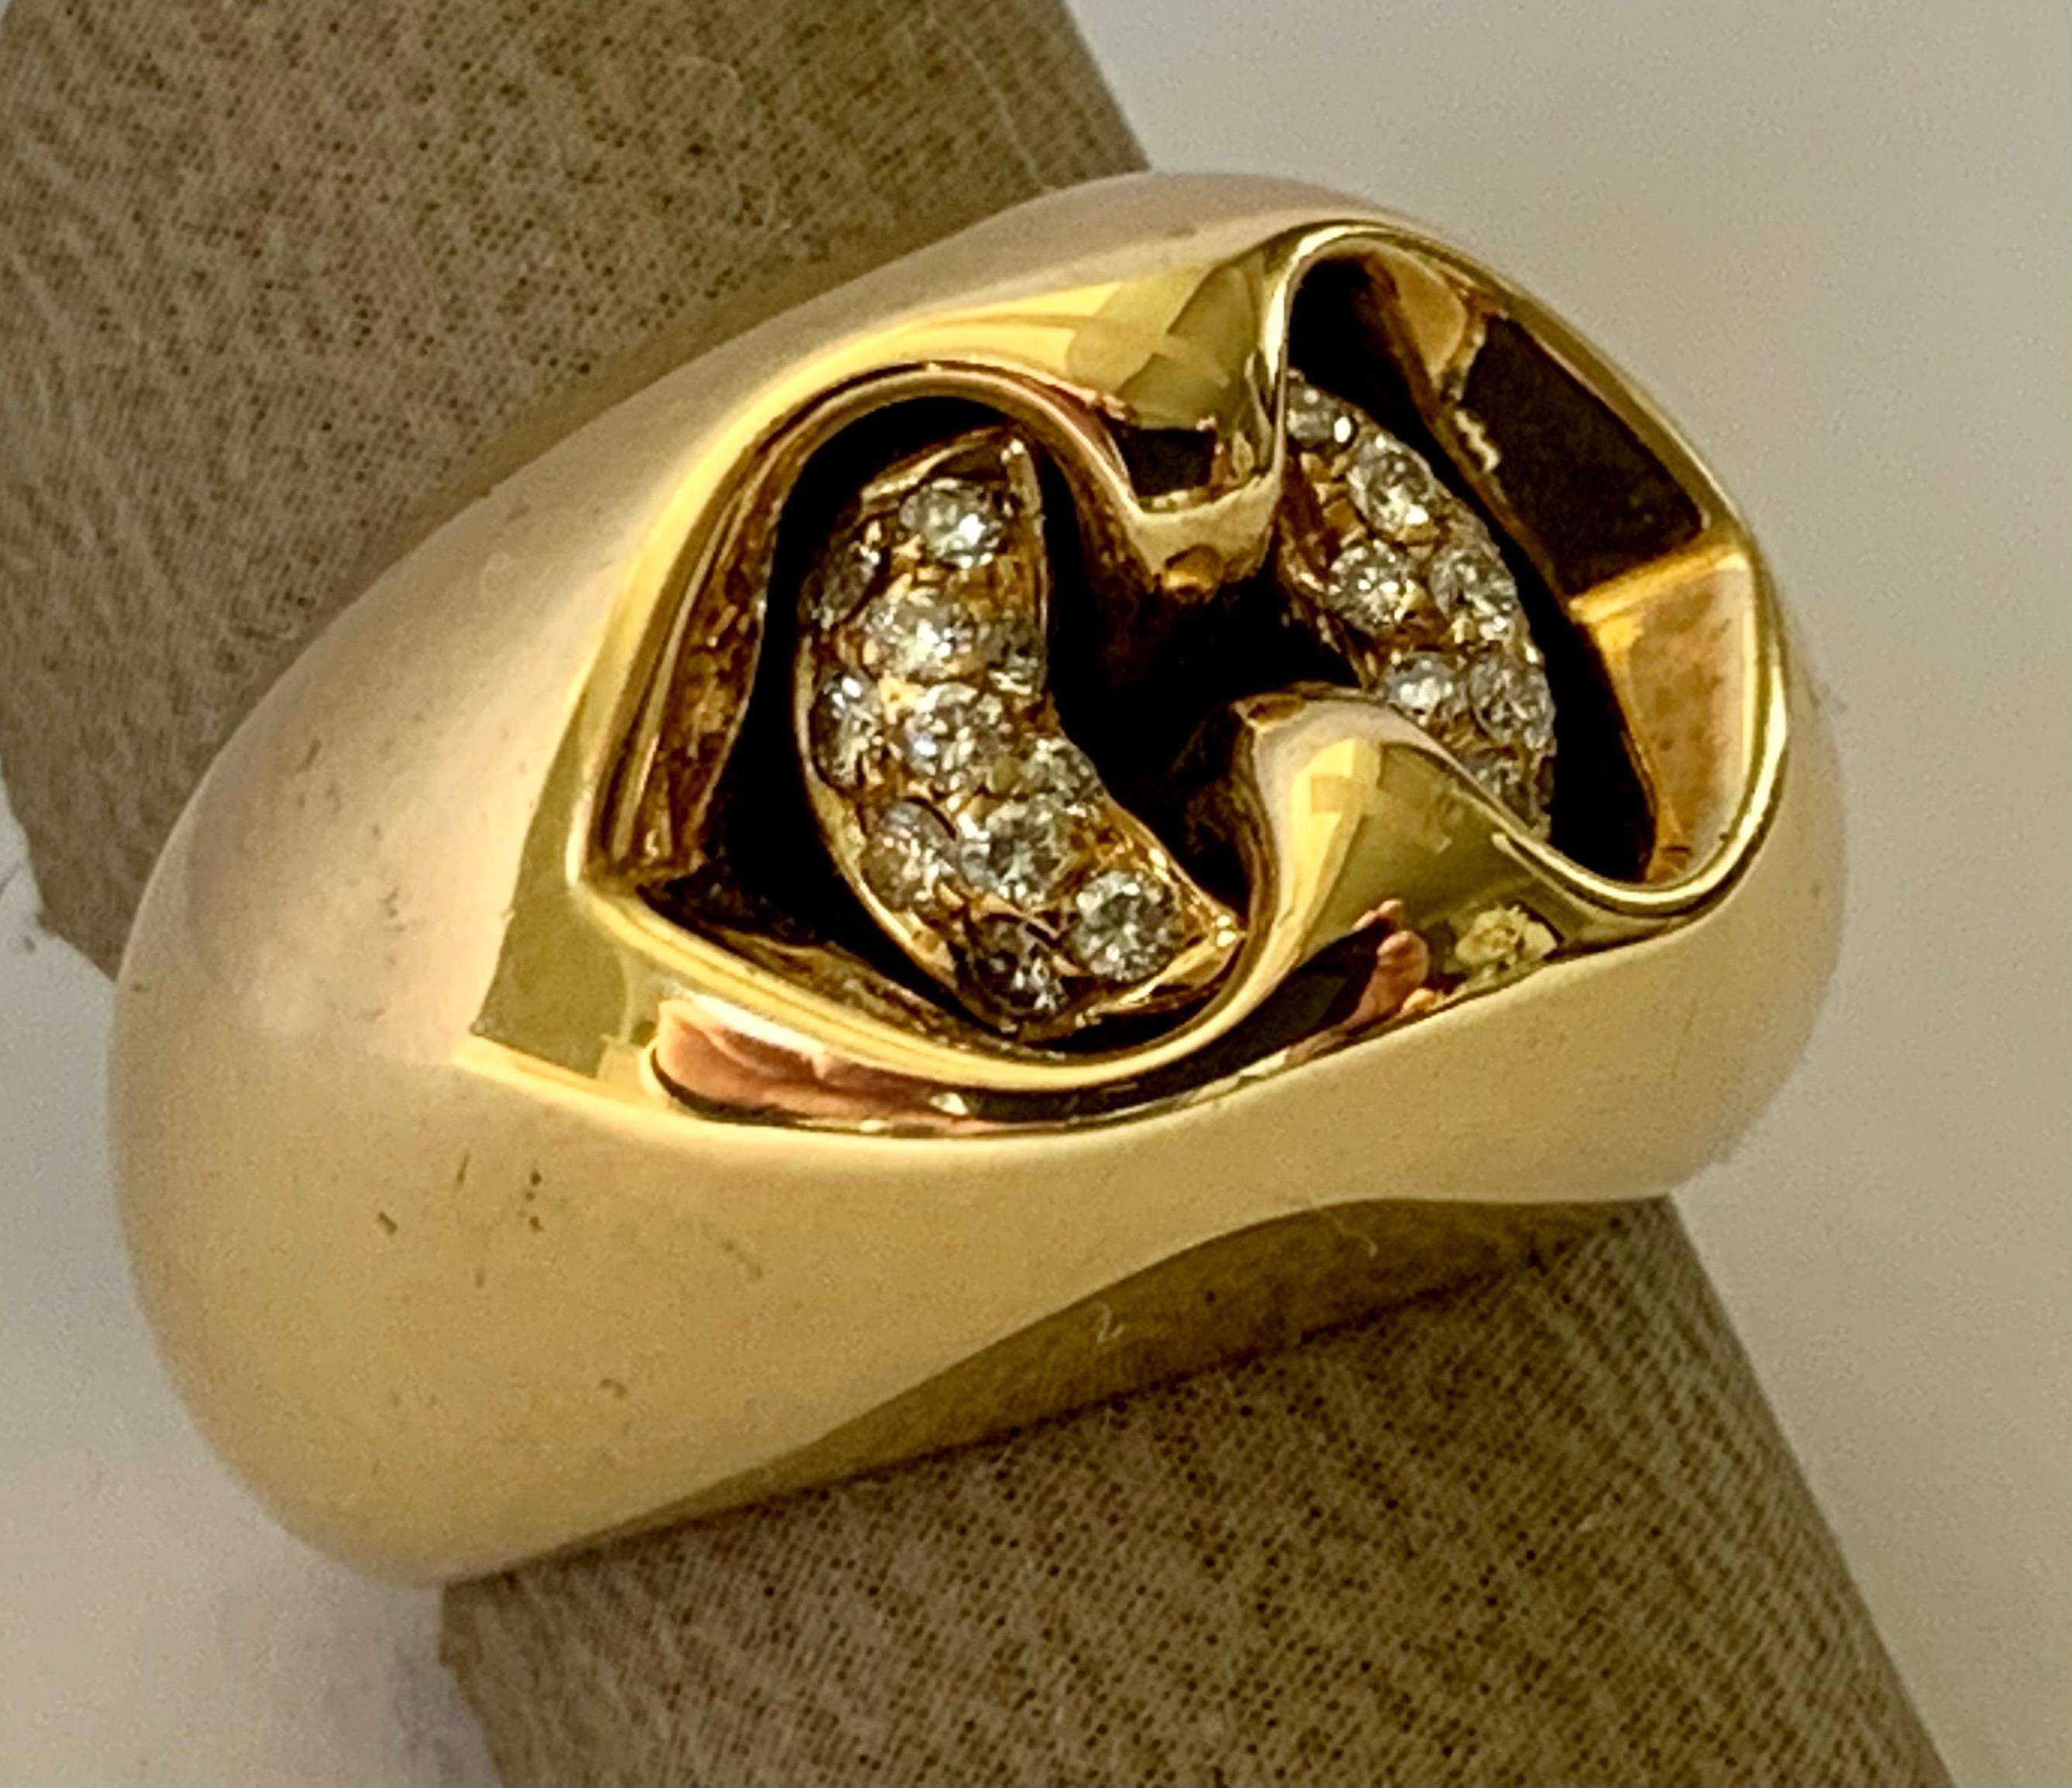 18k yellow Gold Diamond Ring by Bulgari.  Set with round brilliant cut diamonds VS1 clarity, G color total weight approximately 0.25 ct. Stamped Hallmarks: Bvlgari 750 Made In Italy. 
The ring is currently size european size 51/11. Approximate ring